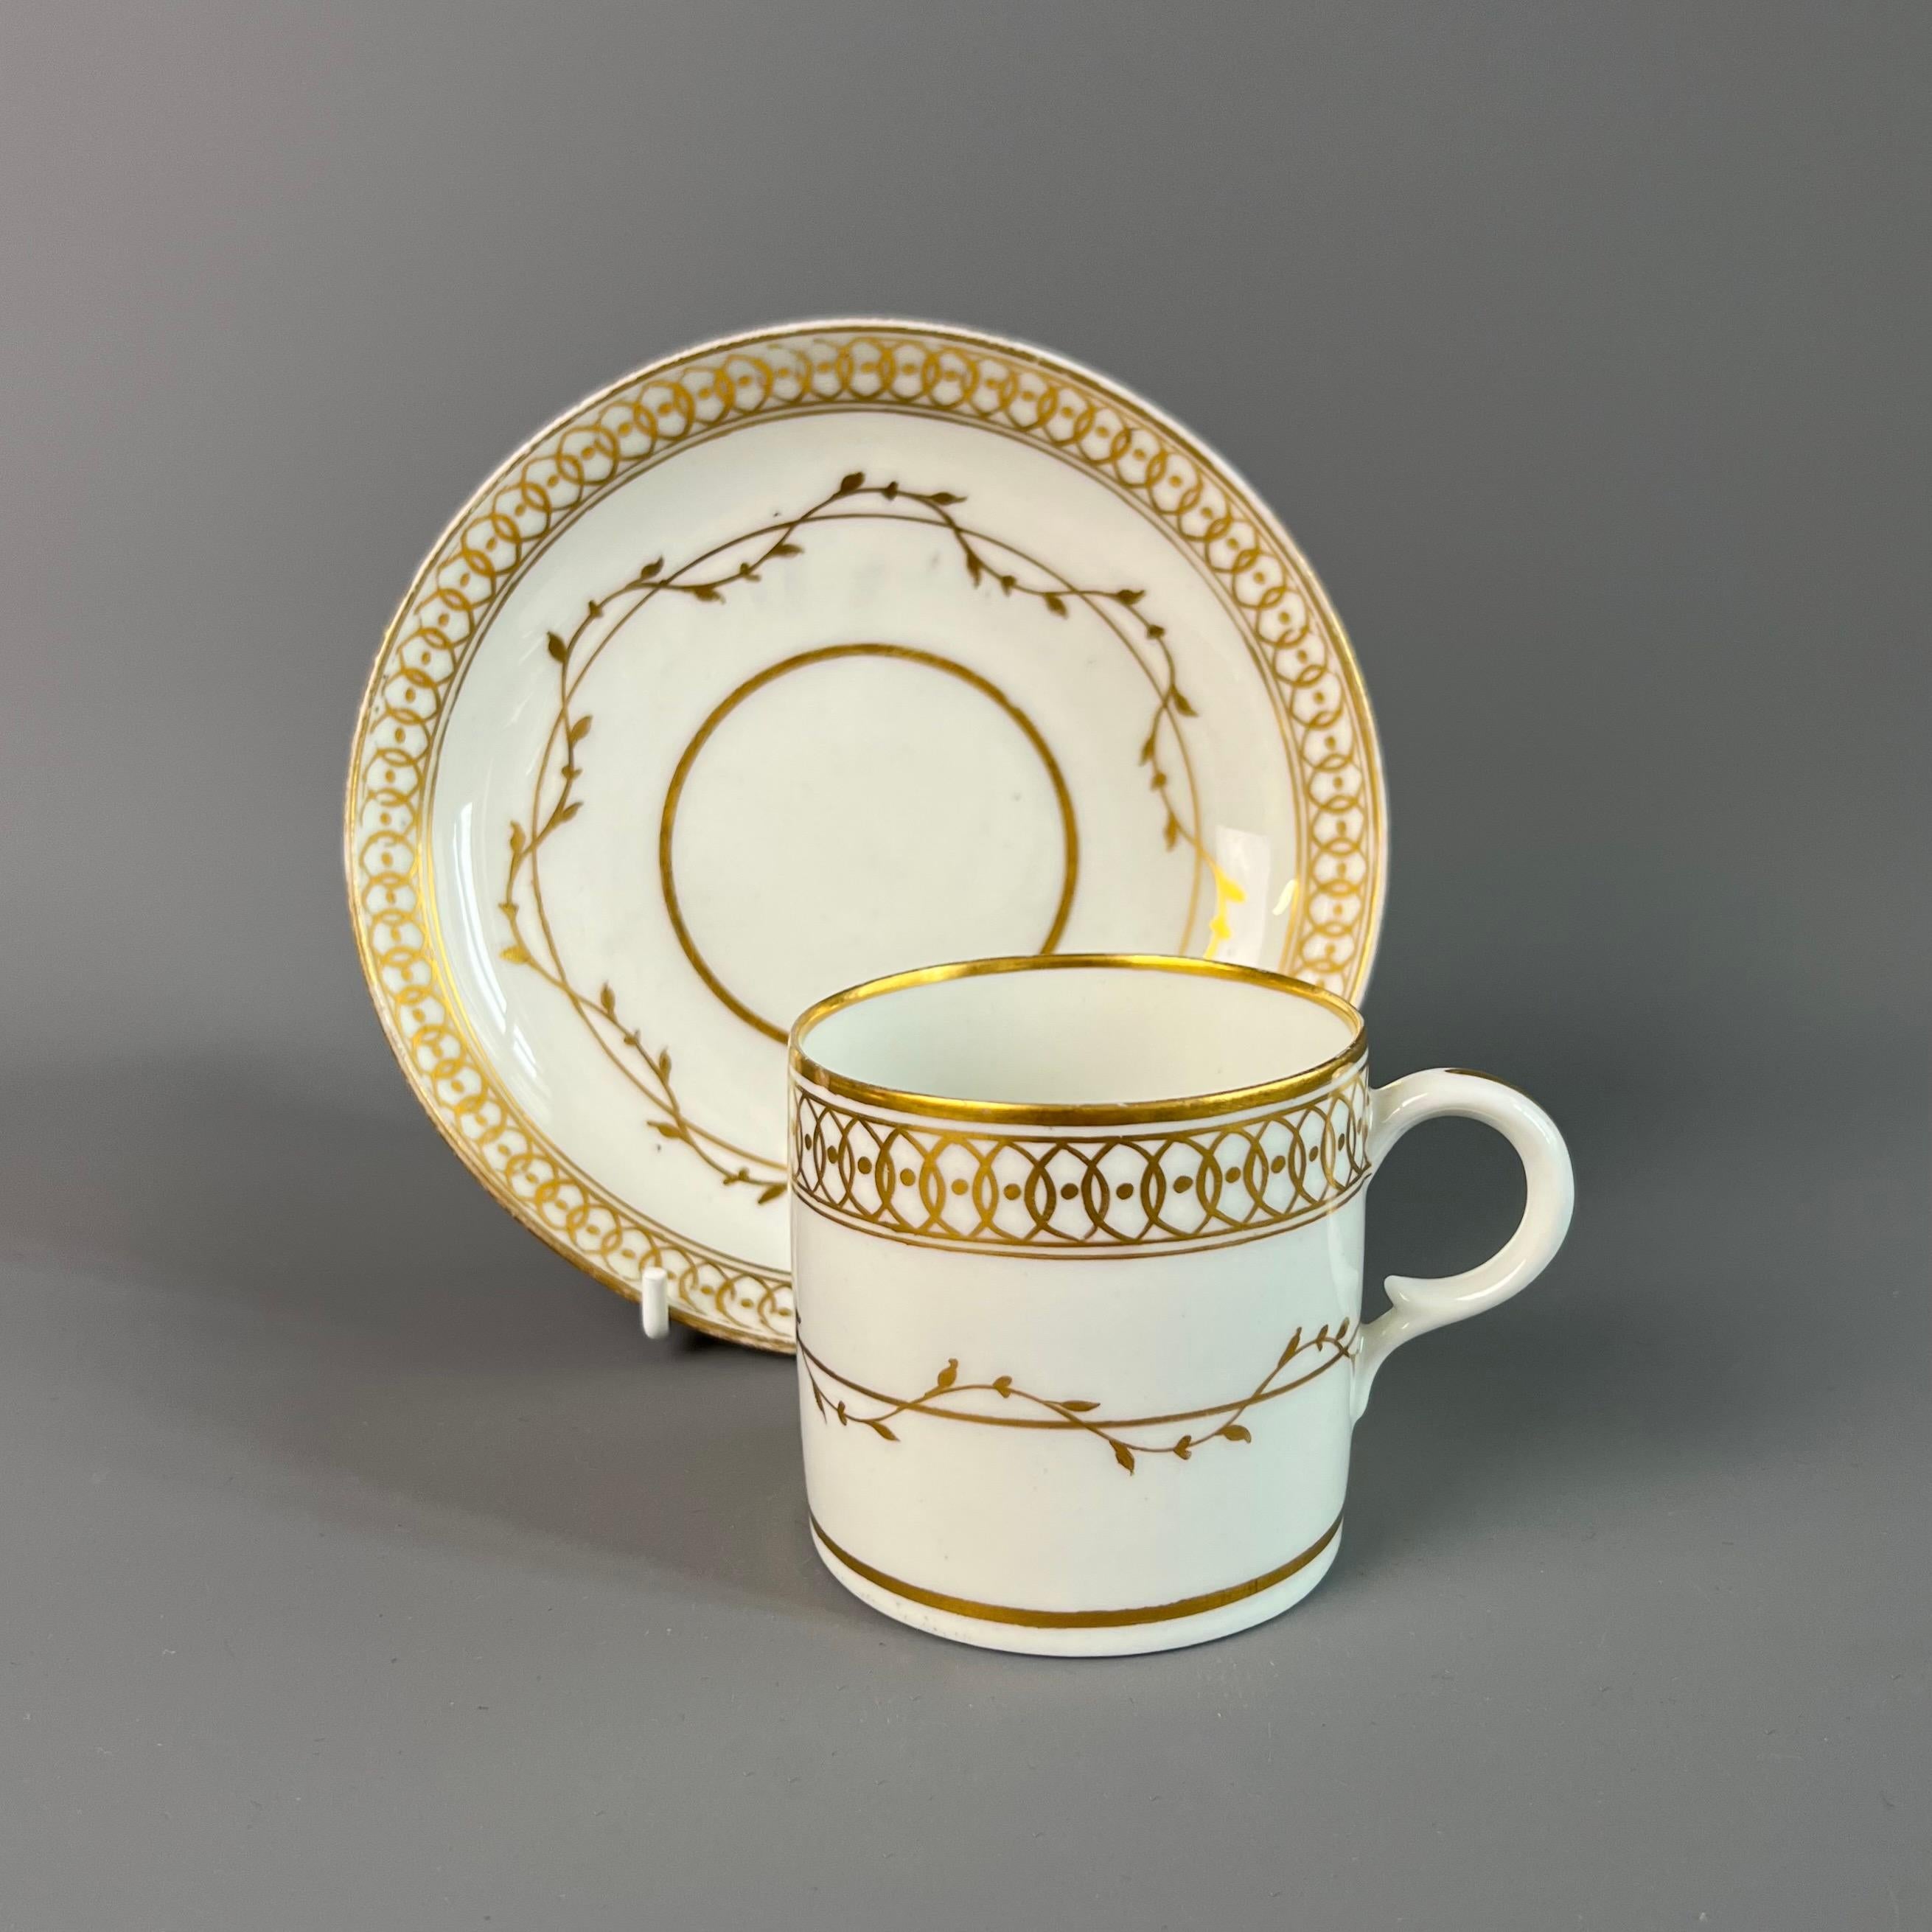 This is a beautiful coffee can with saucer made by Derby in about 1795. The can has a simple but sophisticated gilt pattern on a white ground.

The Derby Porcelain factory has its roots in the late 1740s, when André Planché, a Walloon Huguenot